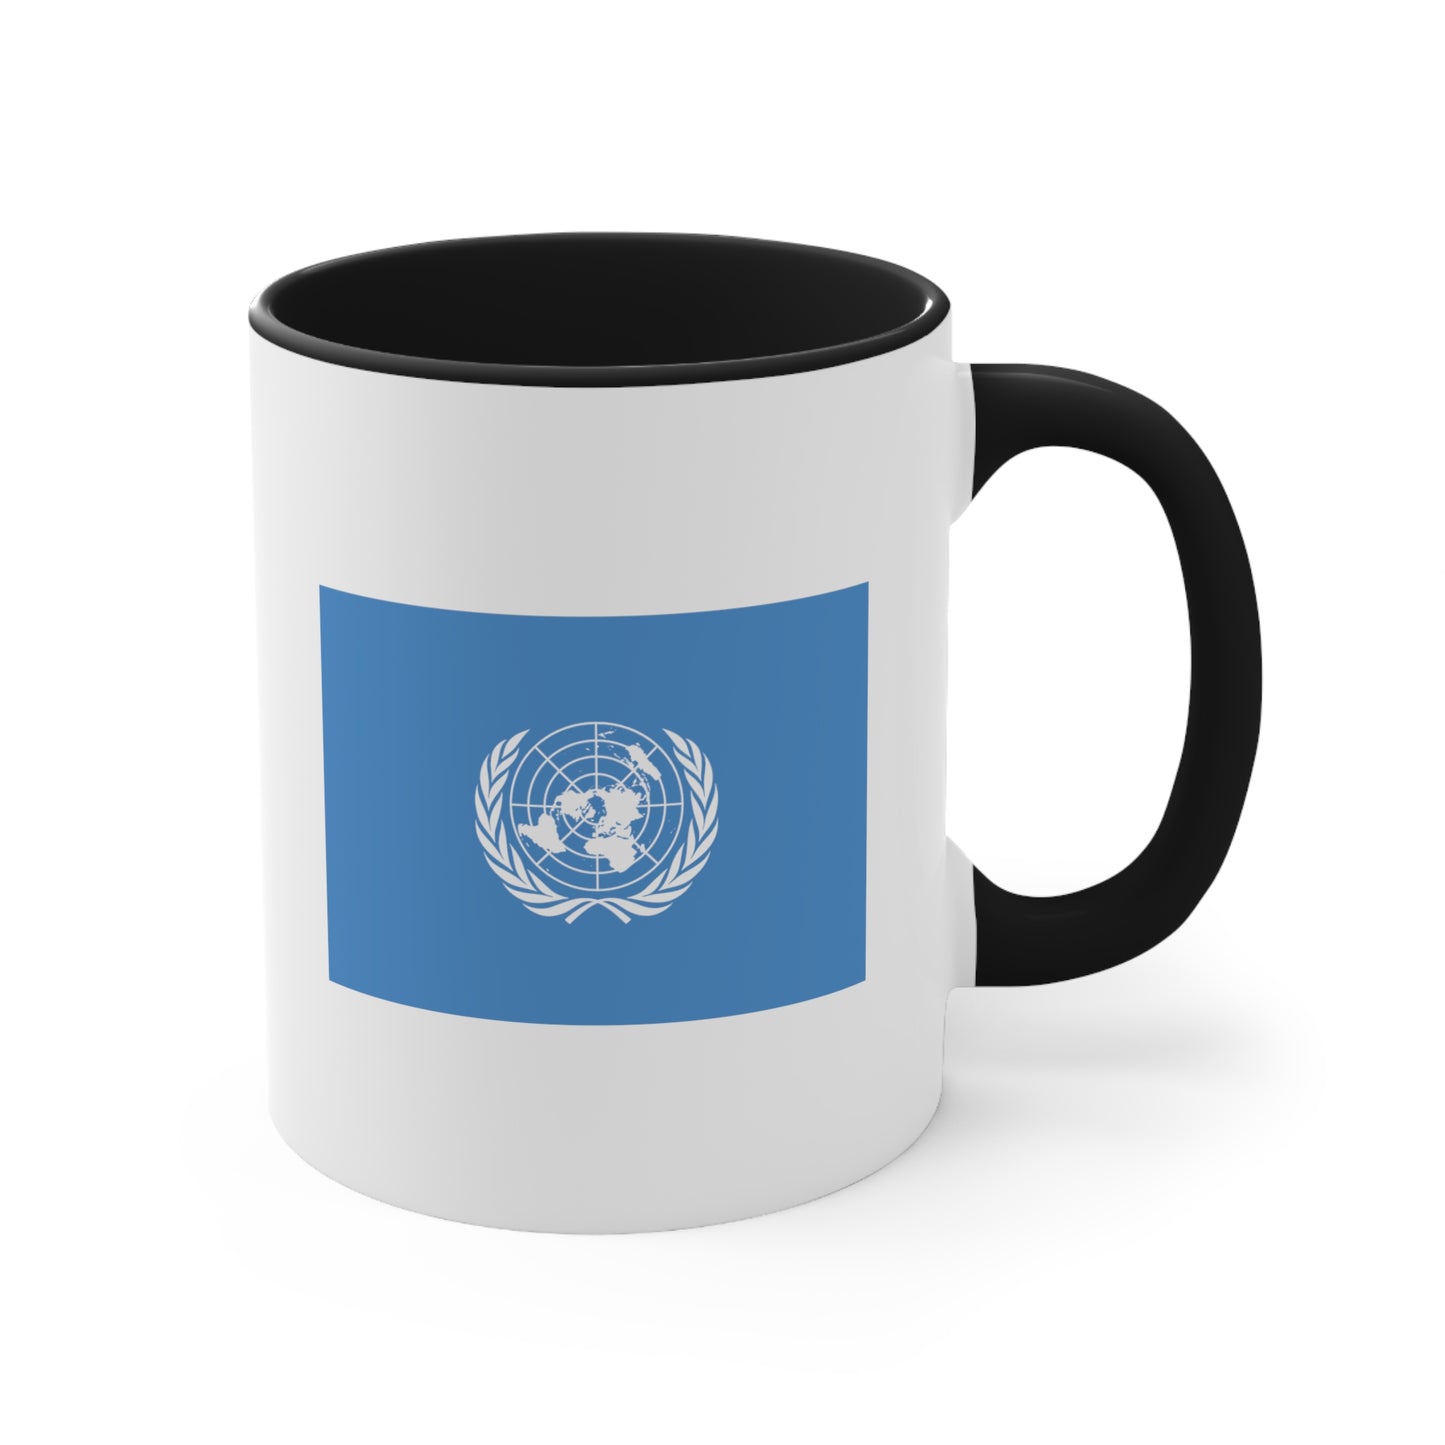 United Nations Coffee Mug - Double Sided Black Accent White Ceramic 11oz by TheGlassyLass.com